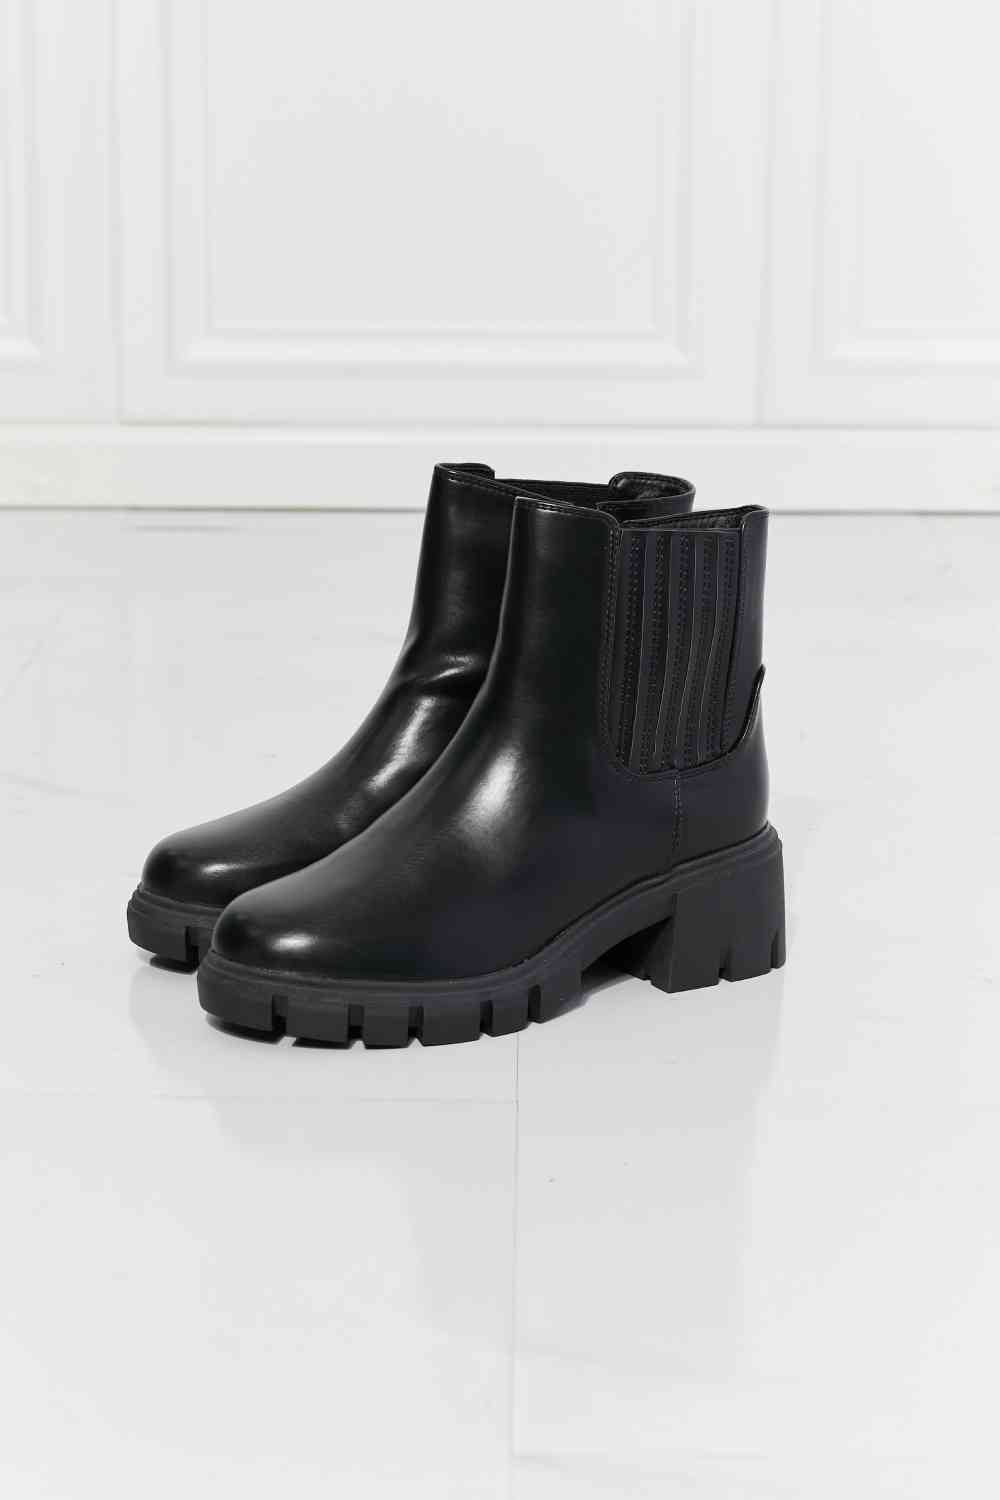 MMShoes What It Takes Lug Sole Chelsea Boots in Black - SELFTRITSS